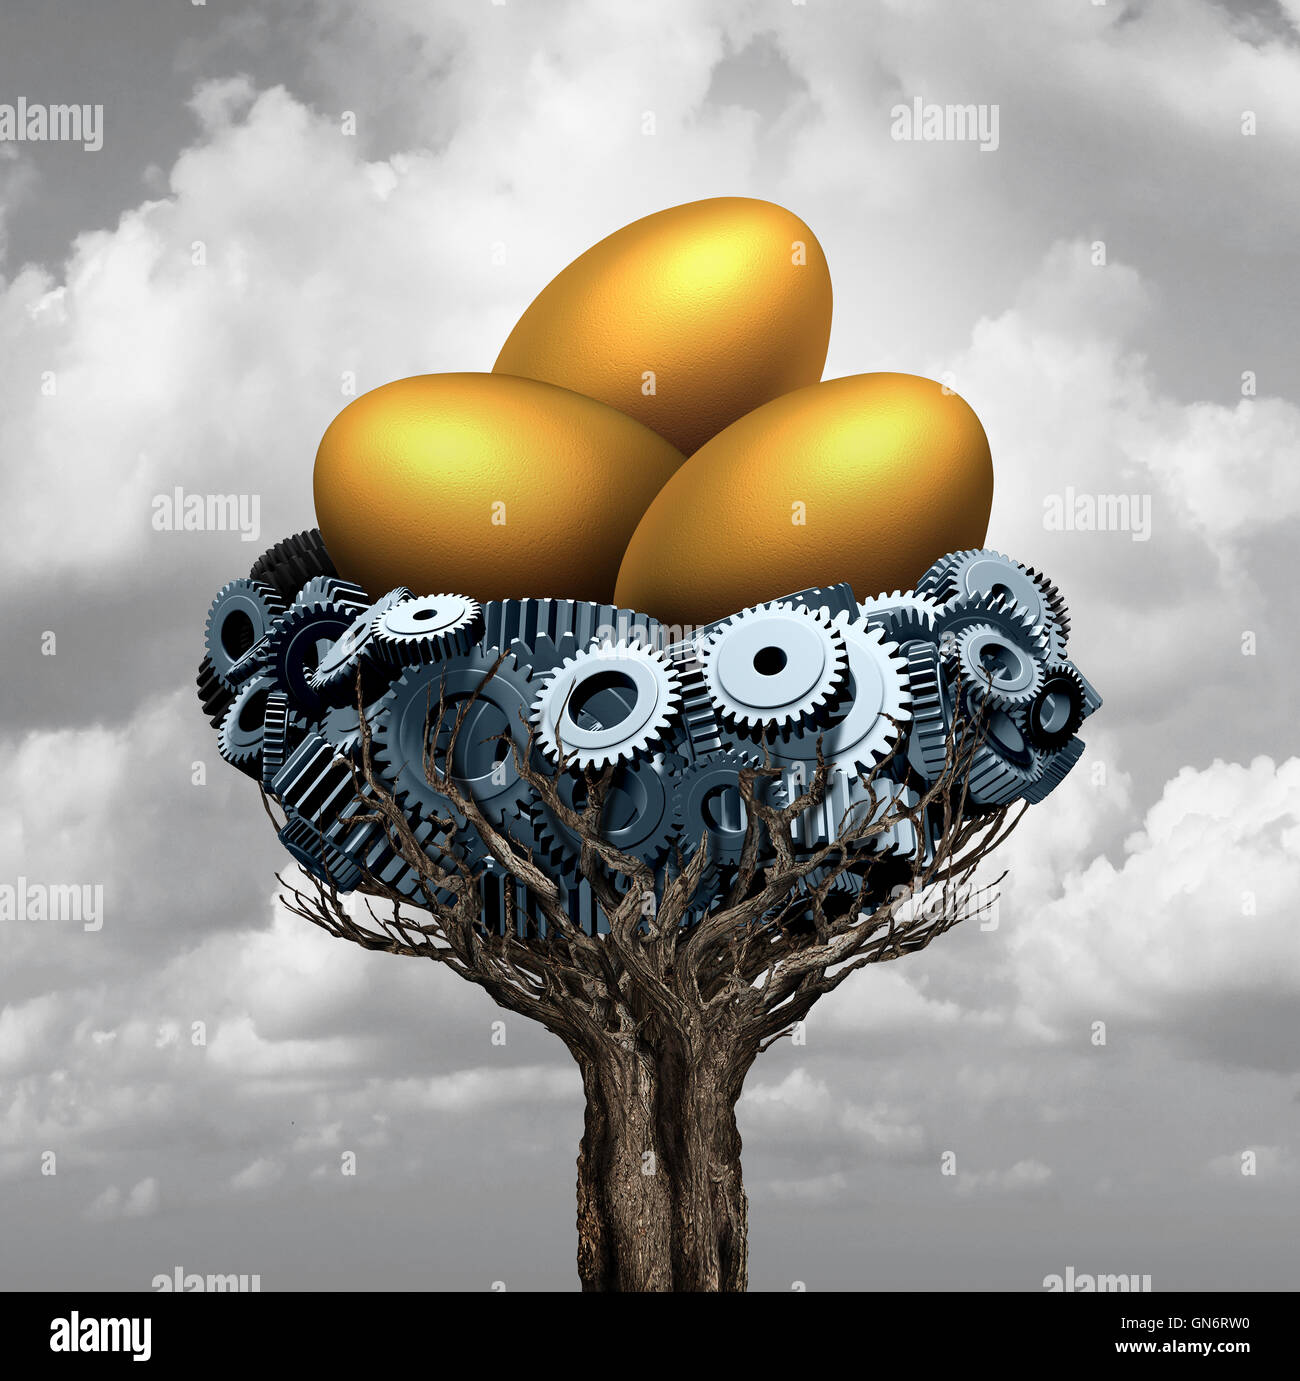 Business nest egg concept as a group of gears and cog wheels shaped as a nesting area for gold as a corporate and industry metaphor for financial investing success for corporation prosperity with 3D illustration elements. Stock Photo